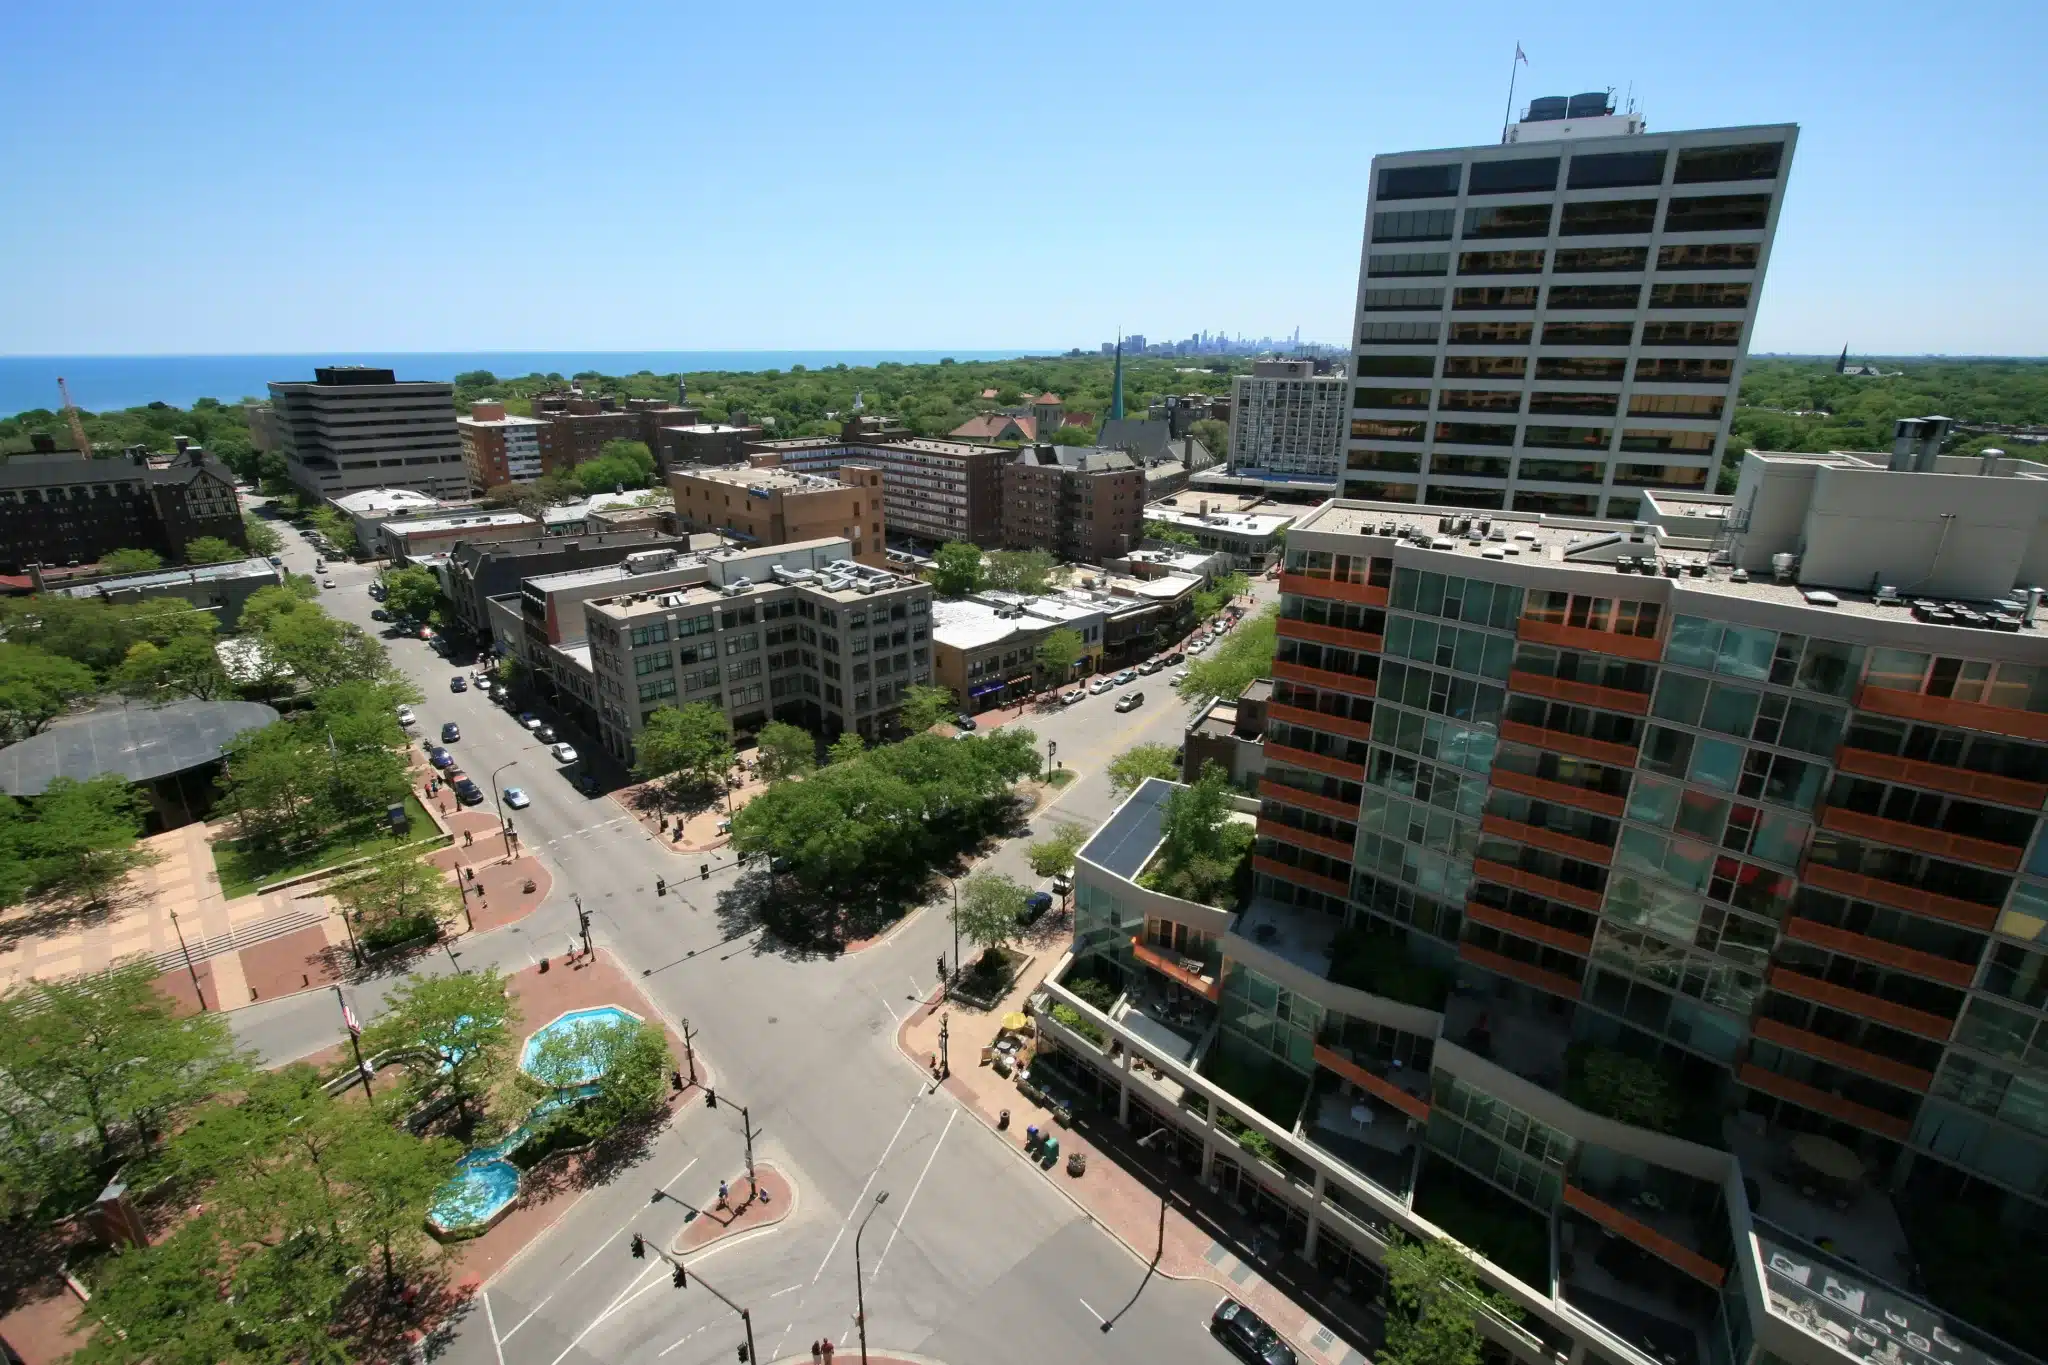 View of downtown Evanston